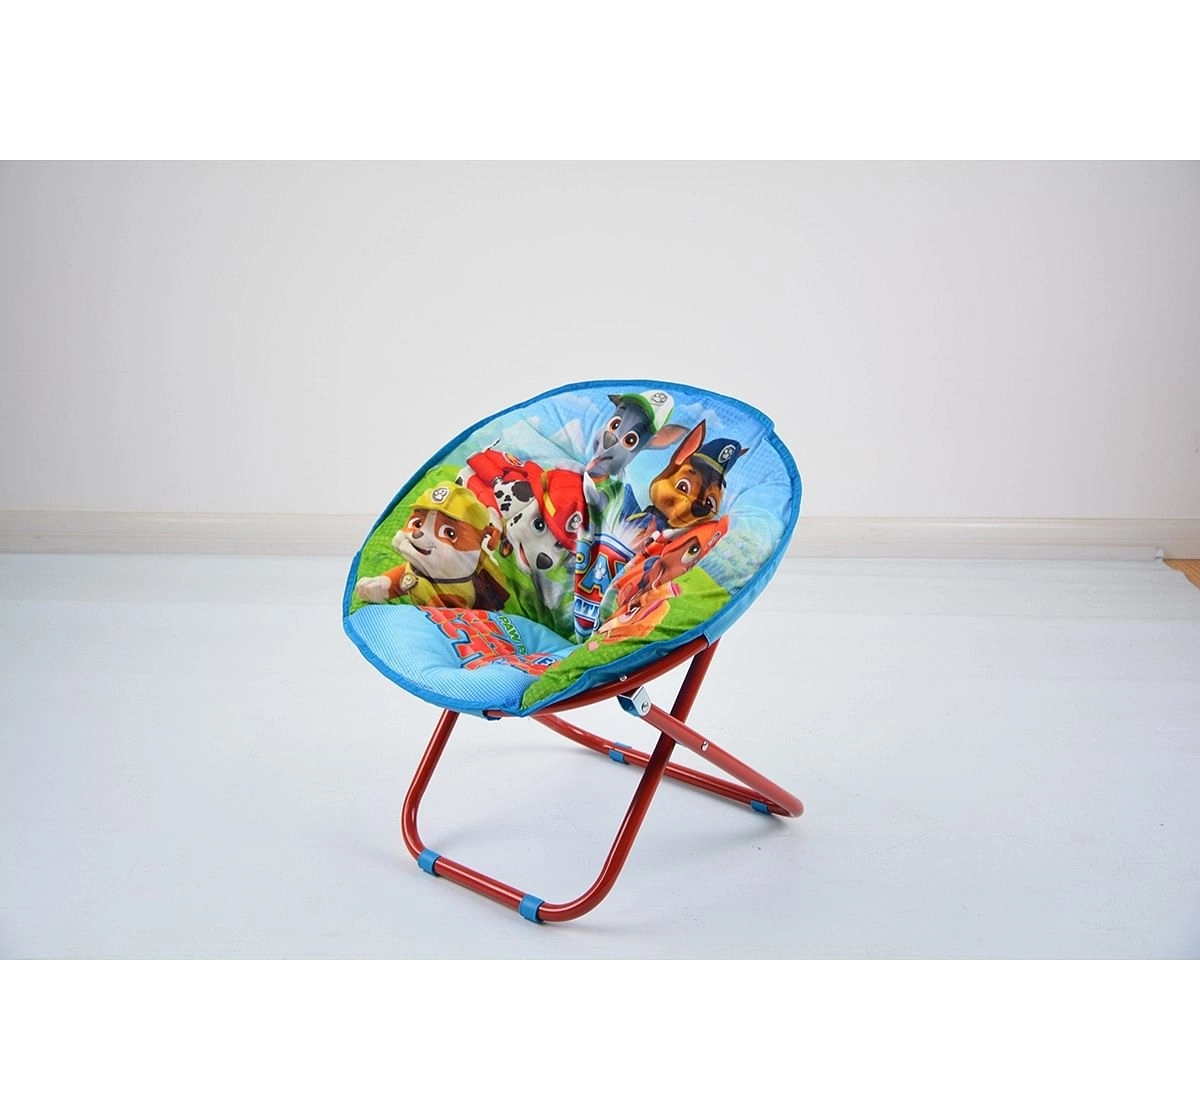 Flourish  Paw Patrol Moon Chair Outdoor Leisure for Kids age 3Y+ 